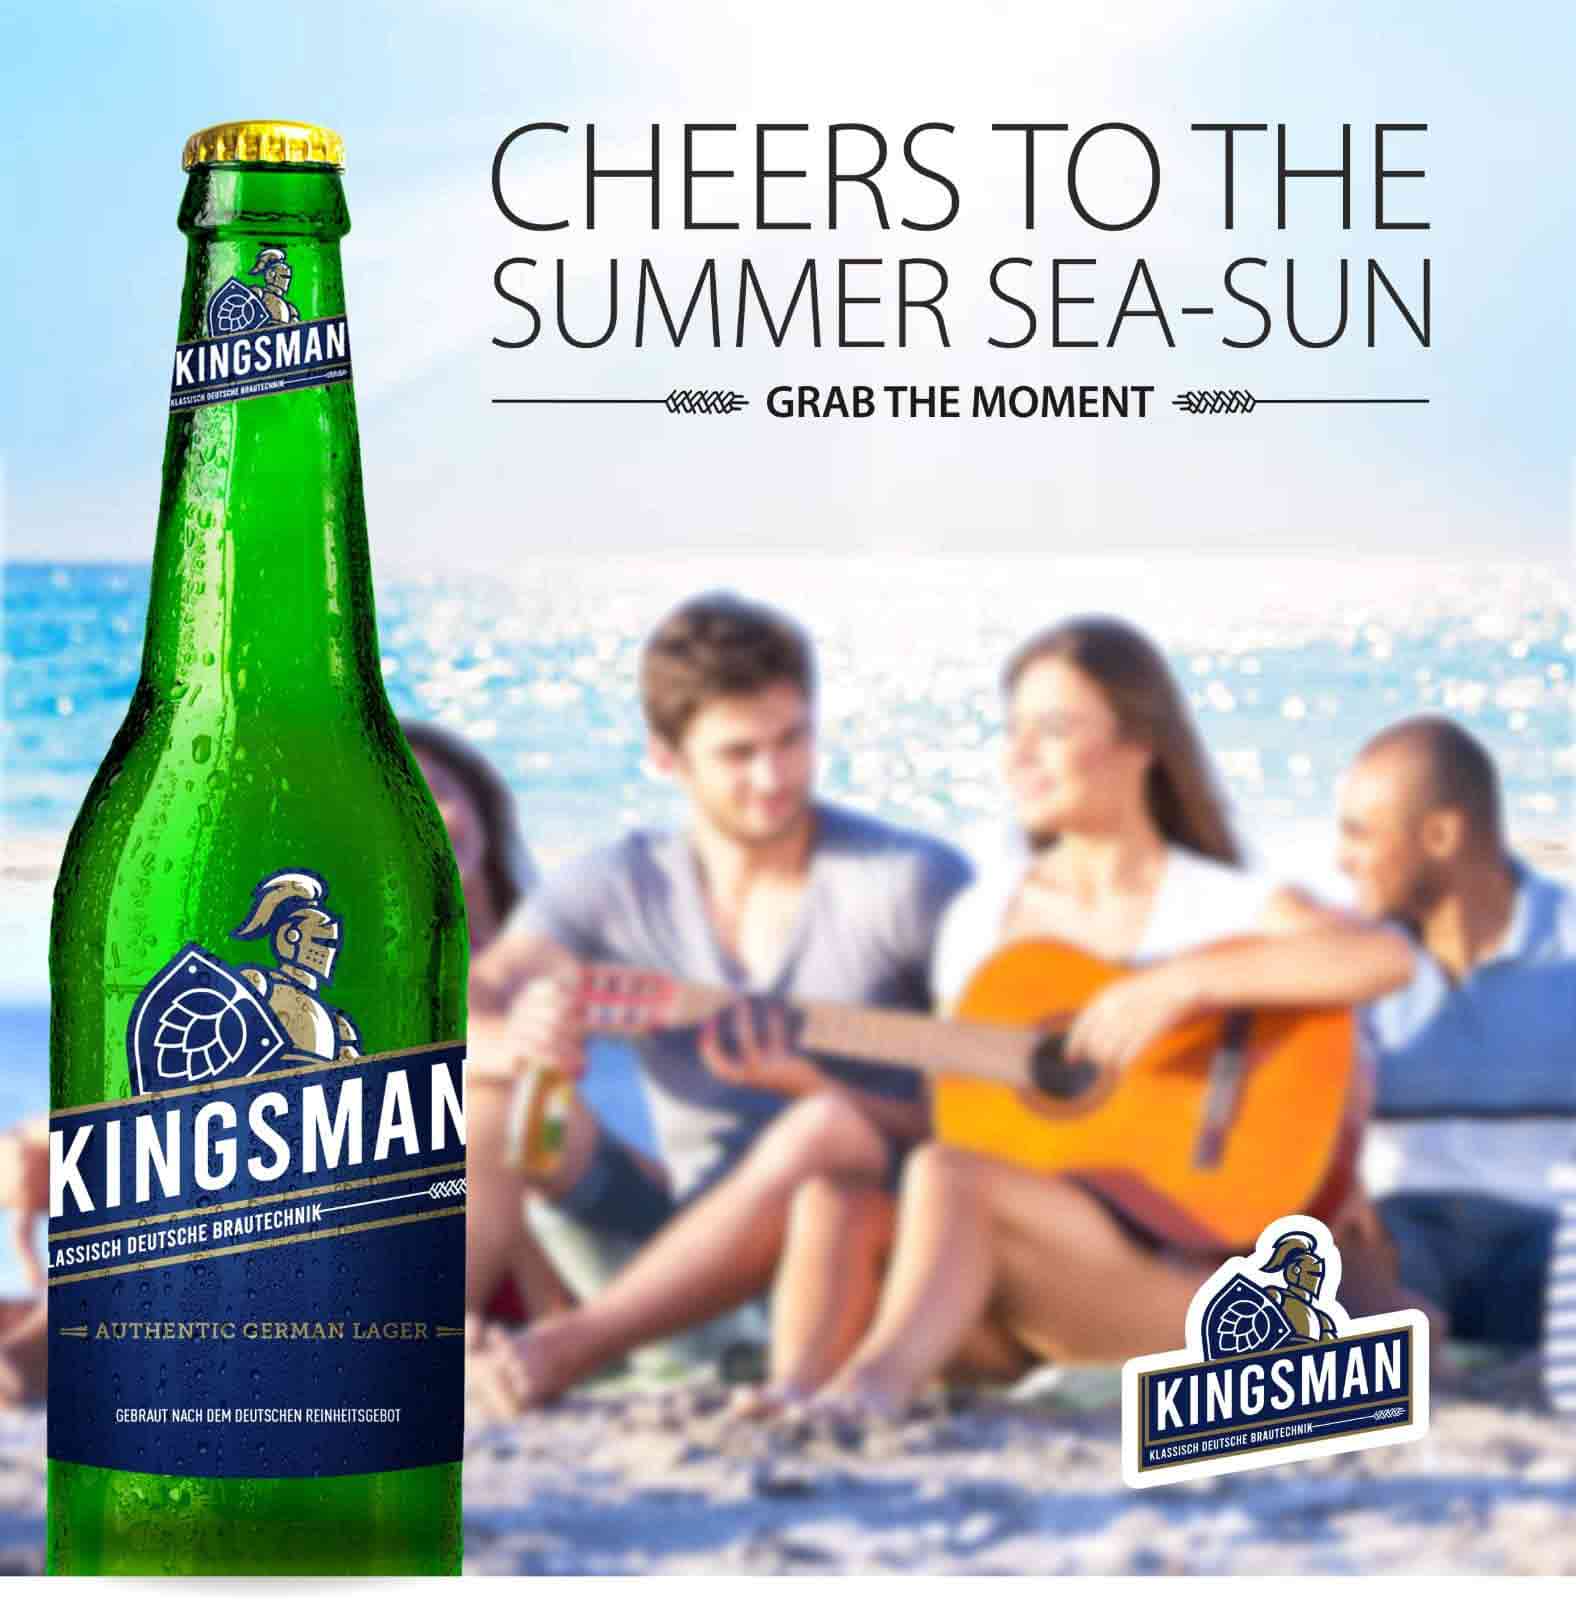 Cheer Up the Summer Sea Sun with King's Man Beer